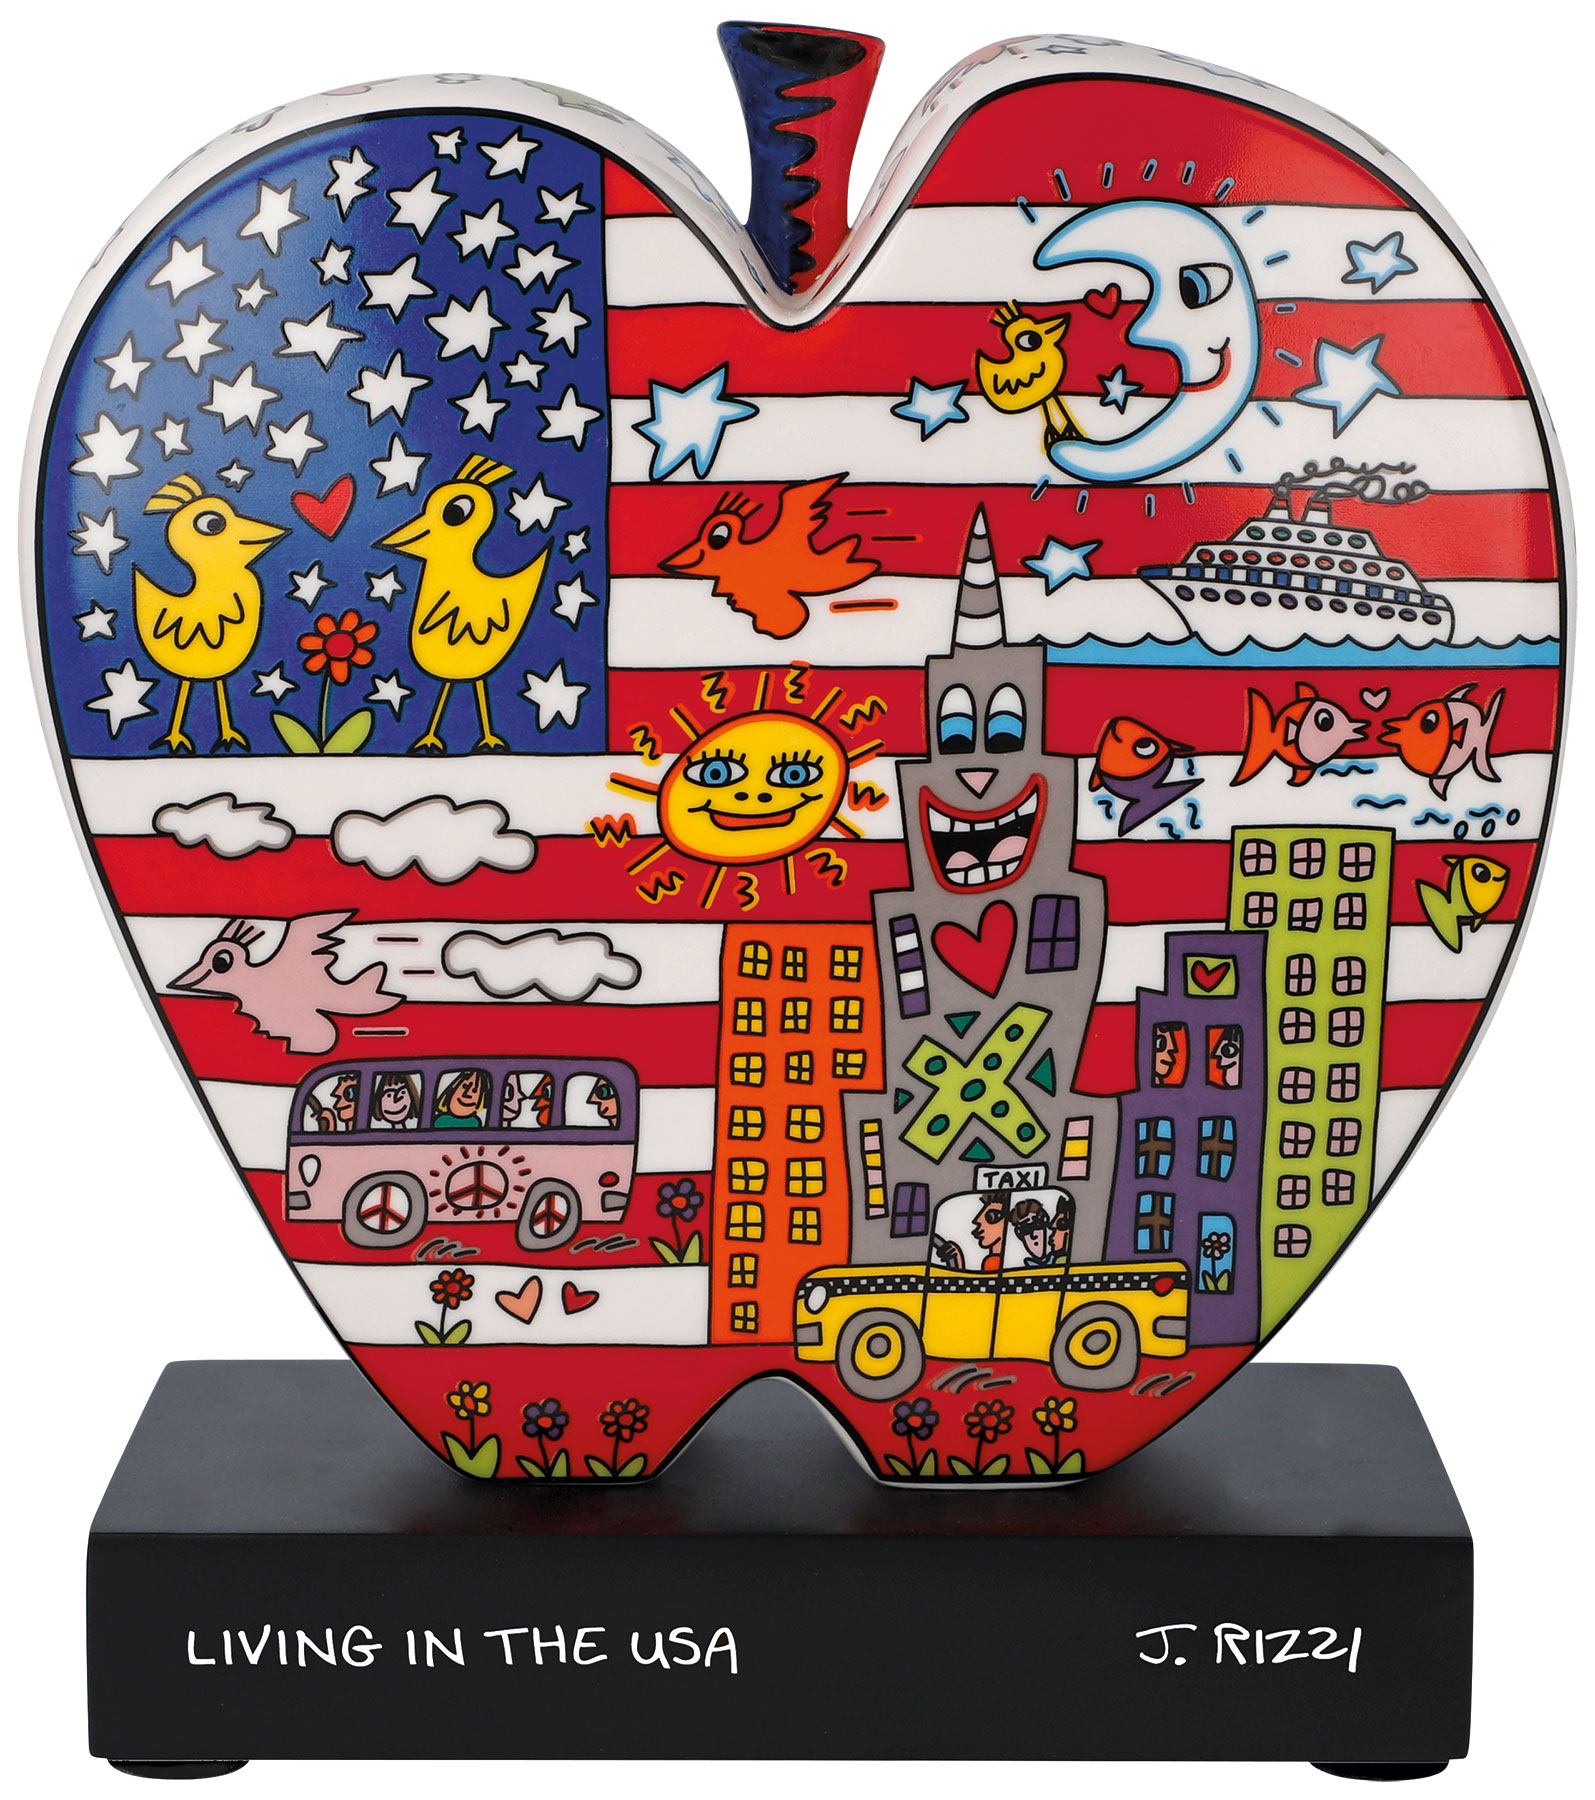 Porcelain object "Living in the USA" by James Rizzi